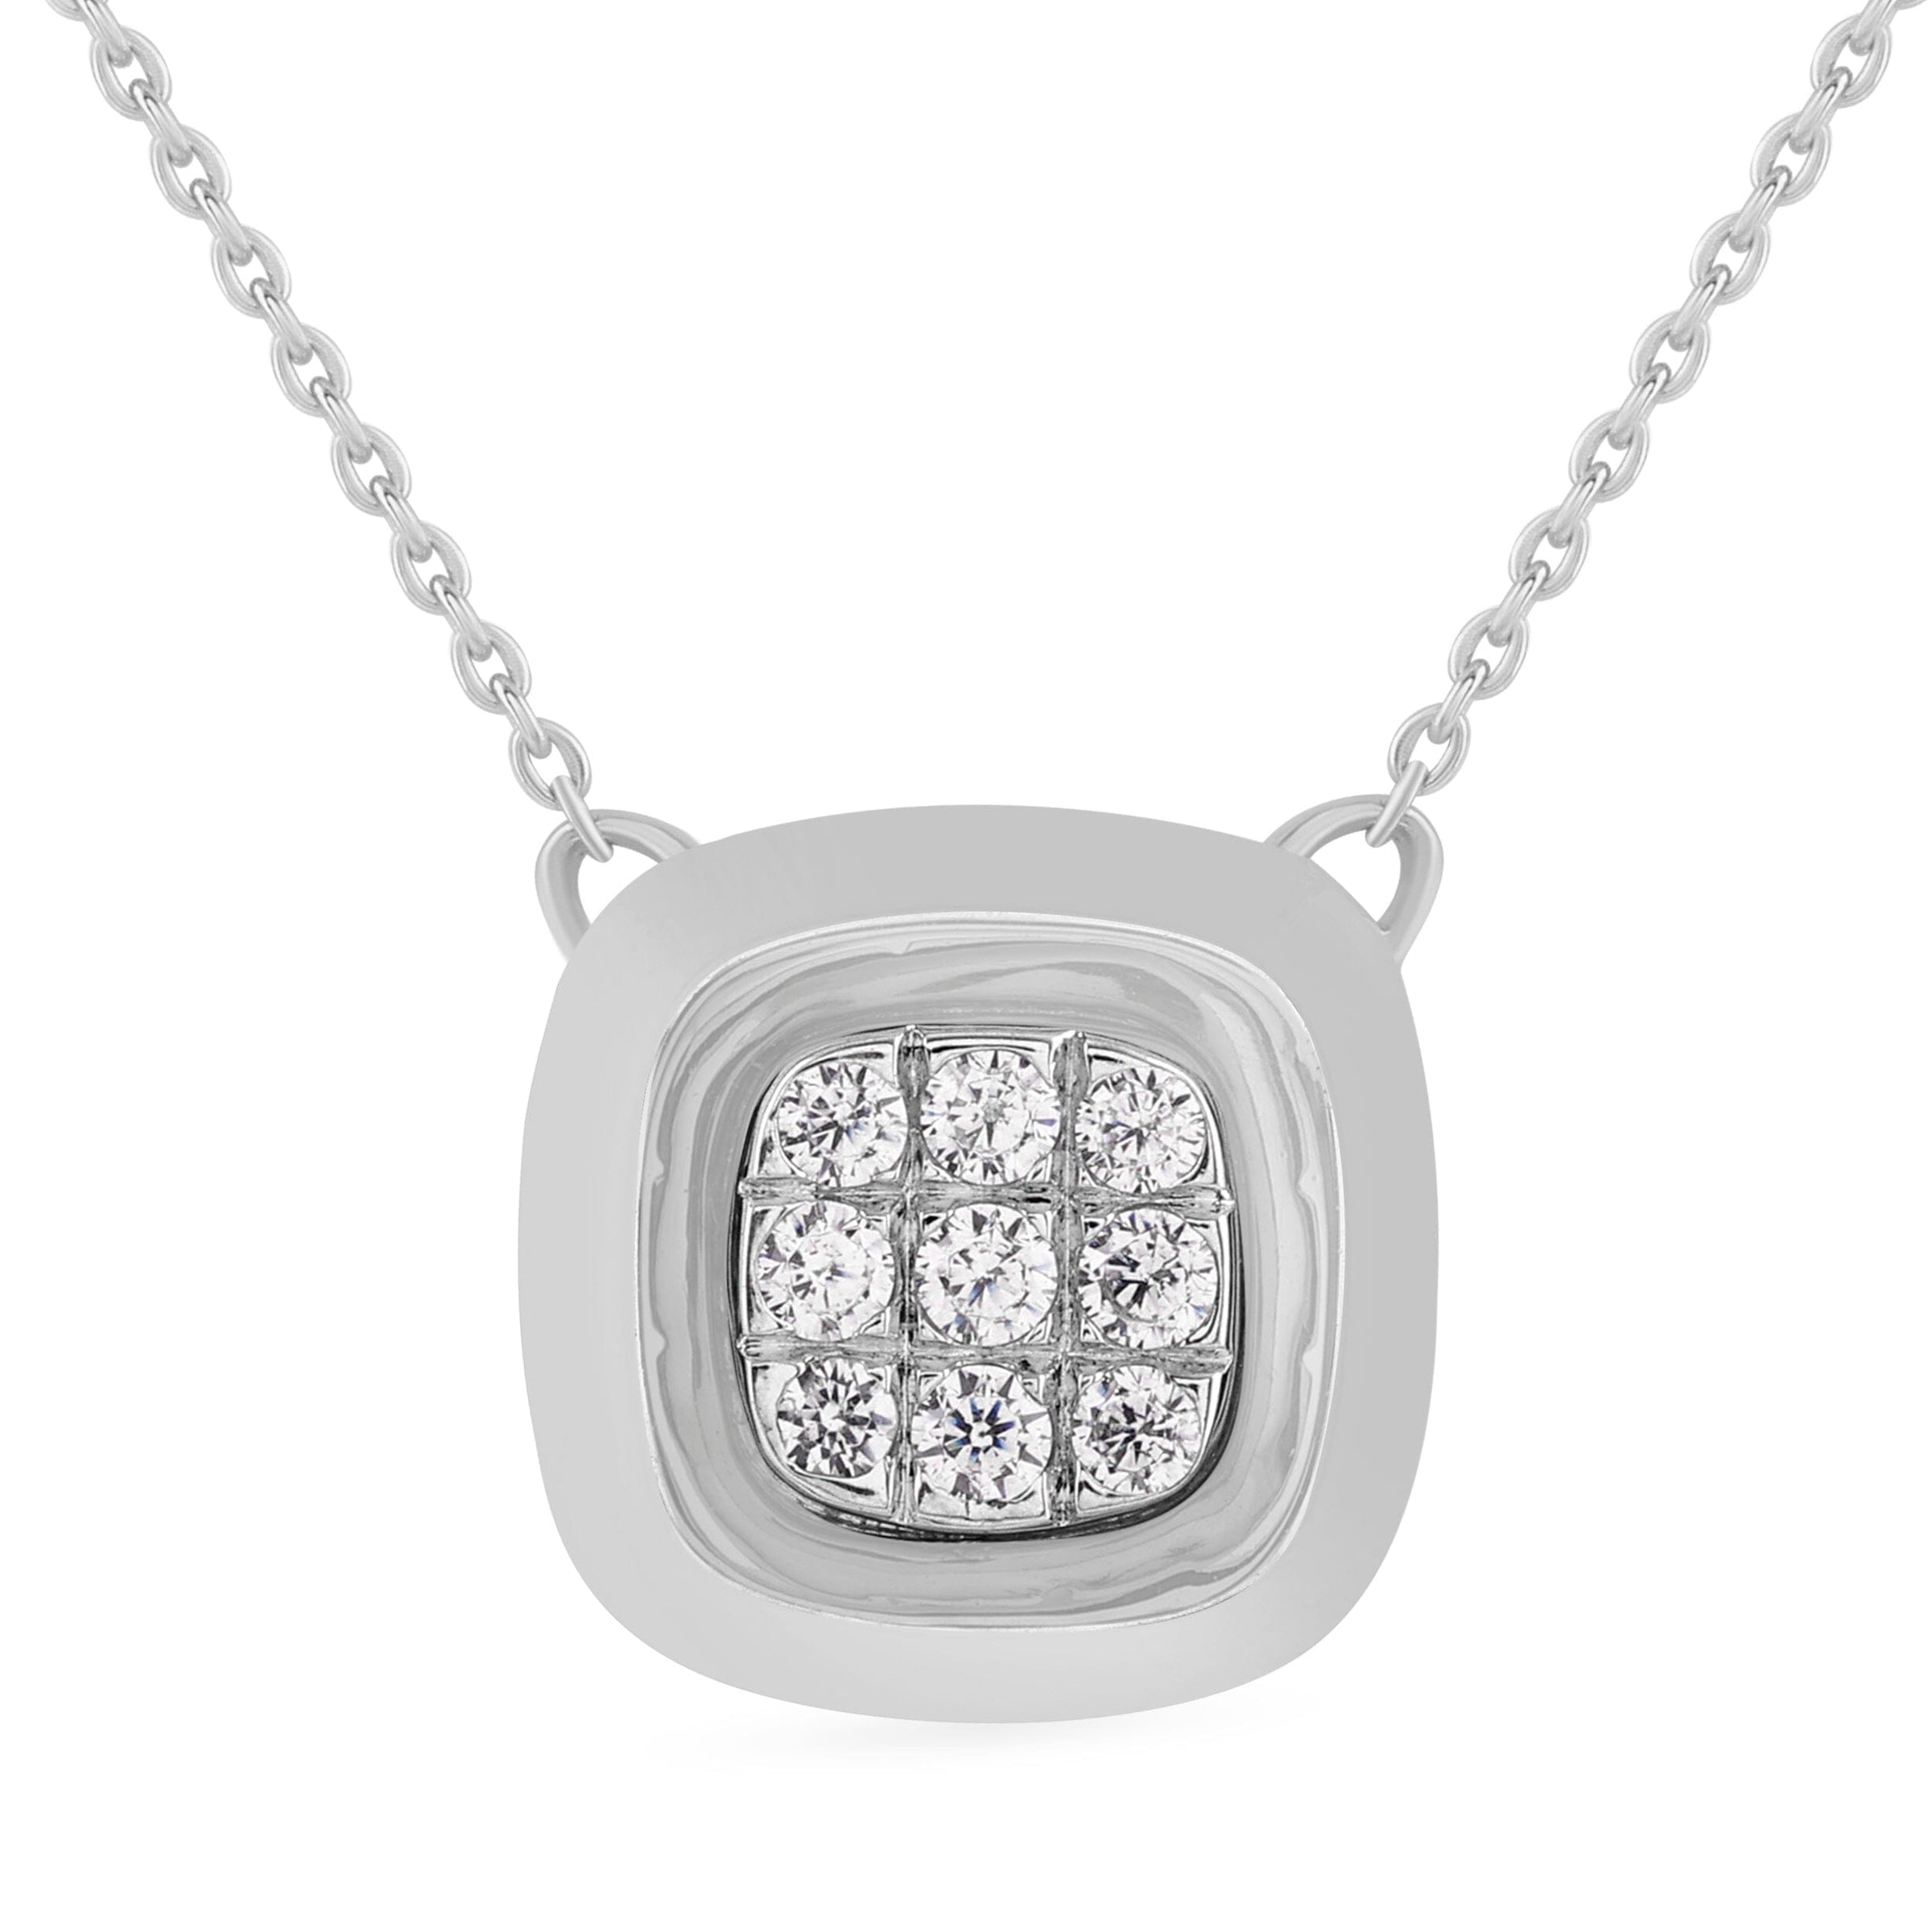 Bezel Set Cushion Look Necklace with 0.10ct of Diamonds in Sterling Silver Necklaces Bevilles 